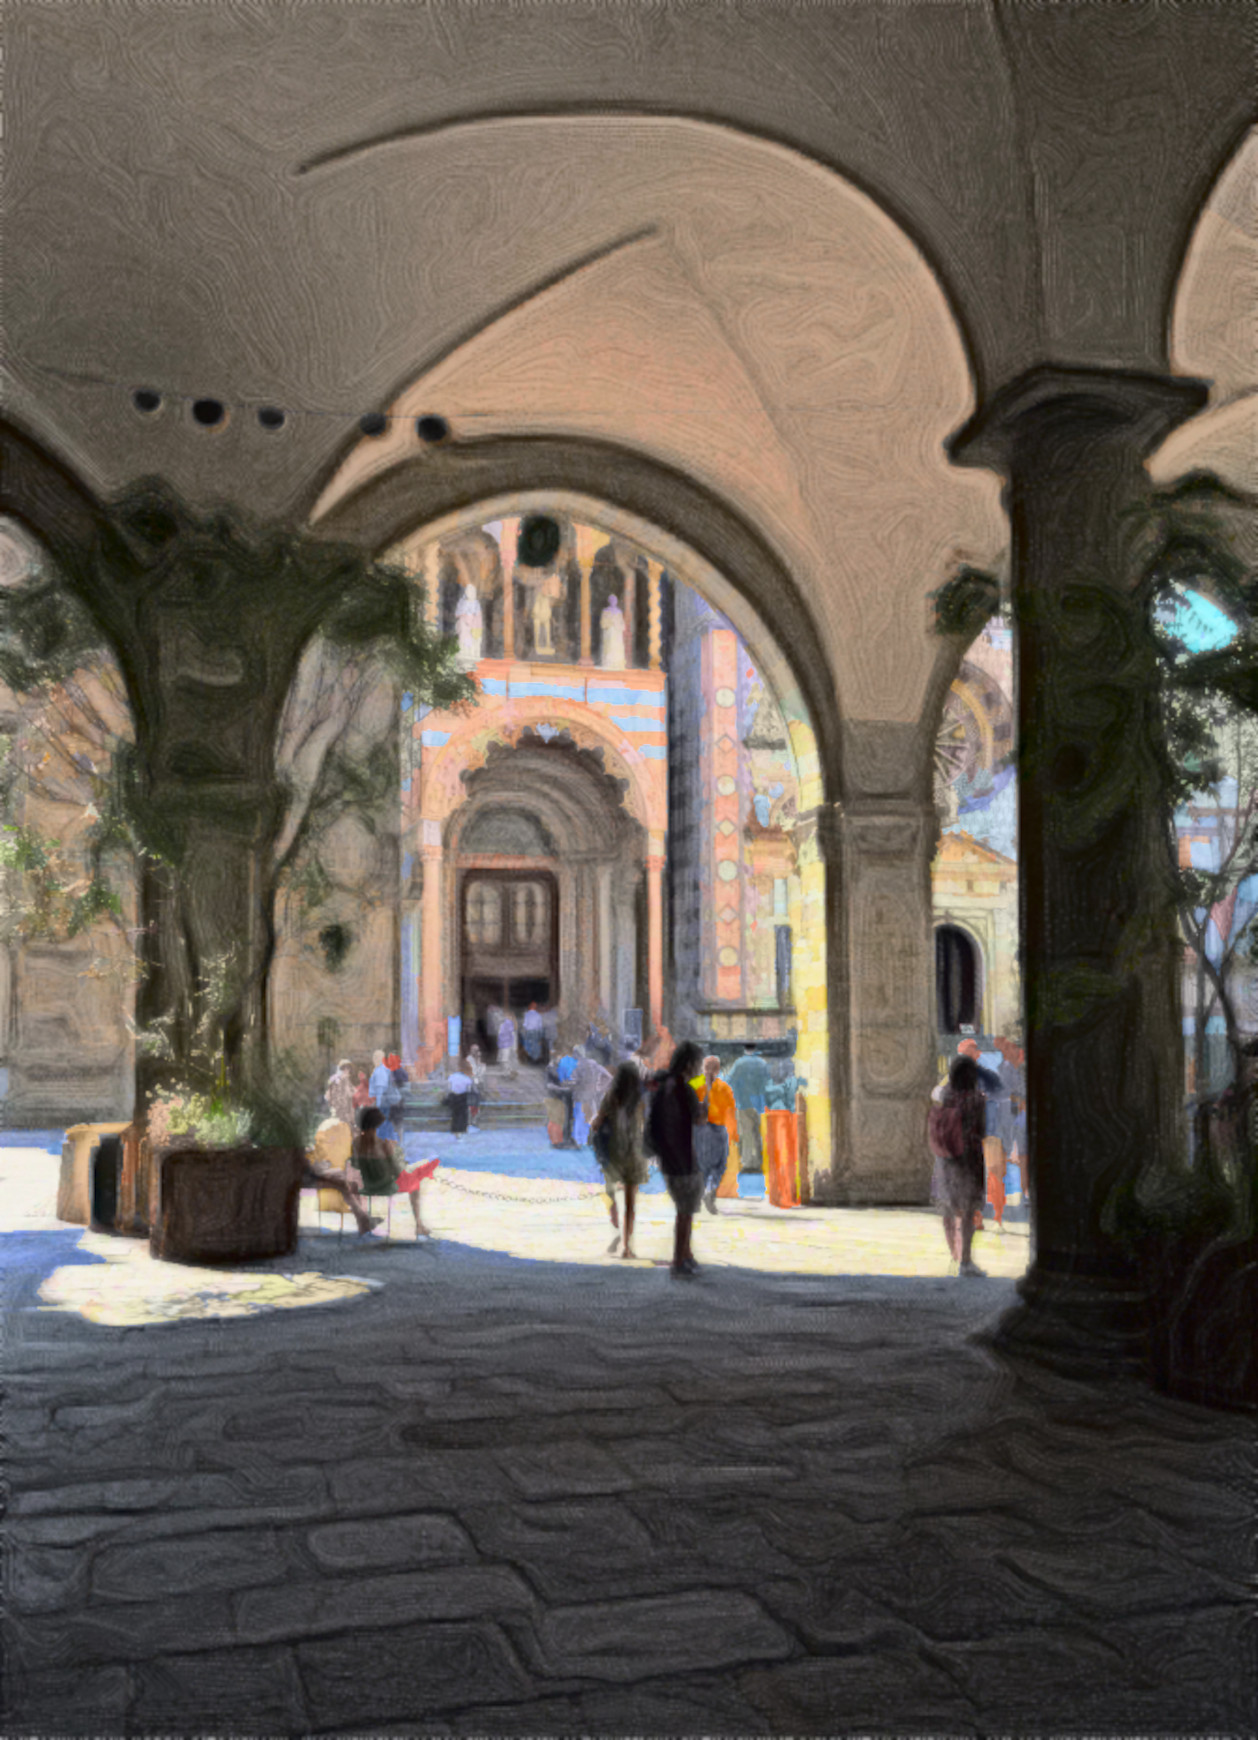 2022-04-11 16-56-37bergamo_i_love_you_by_sergiba_dduhqd4-fullview Paint  with Couleurs Rayees 2 (Effect Look fine).jpeg